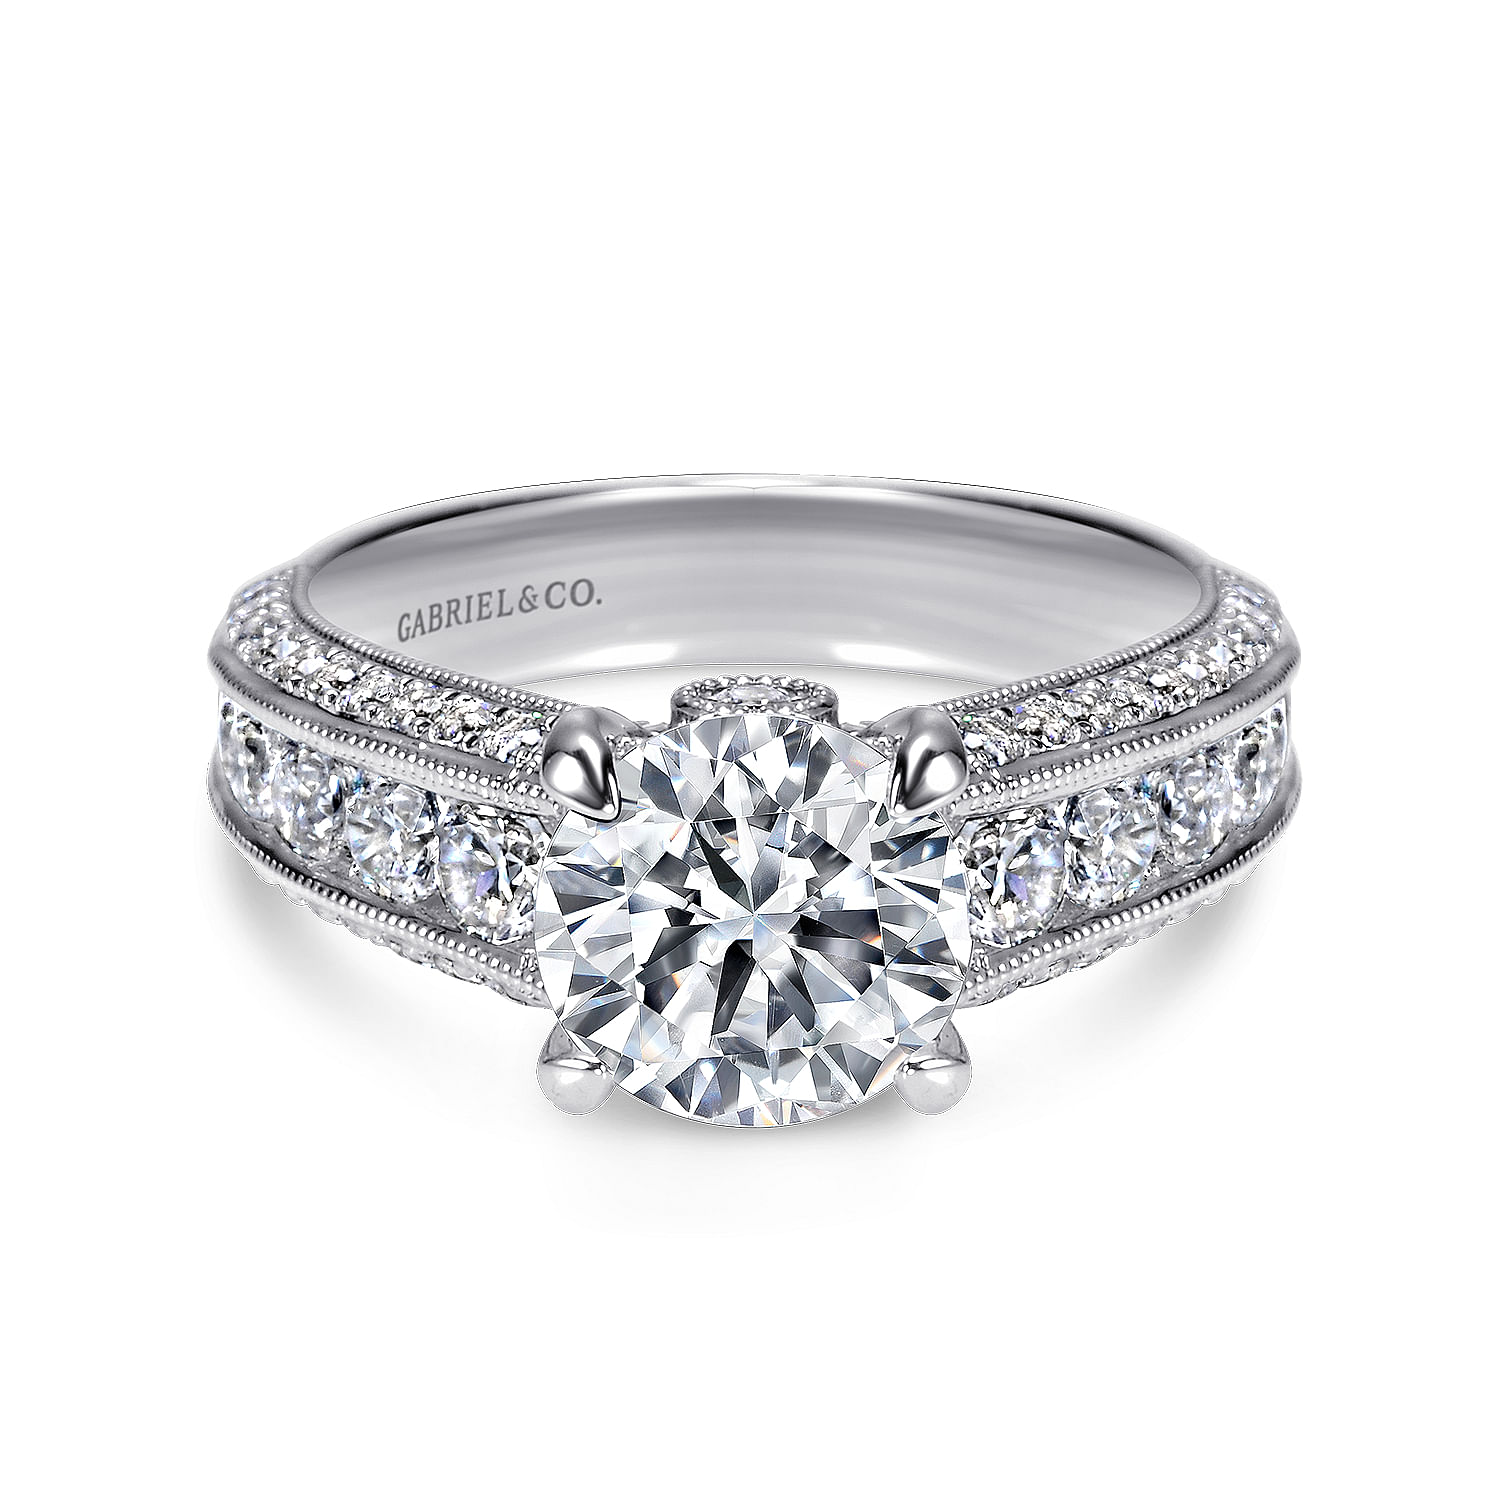 Rebecca---Vintage-Inspired-Platinum-Round-Wide-Band-Diamond-Channel-Set-Engagement-Ring1